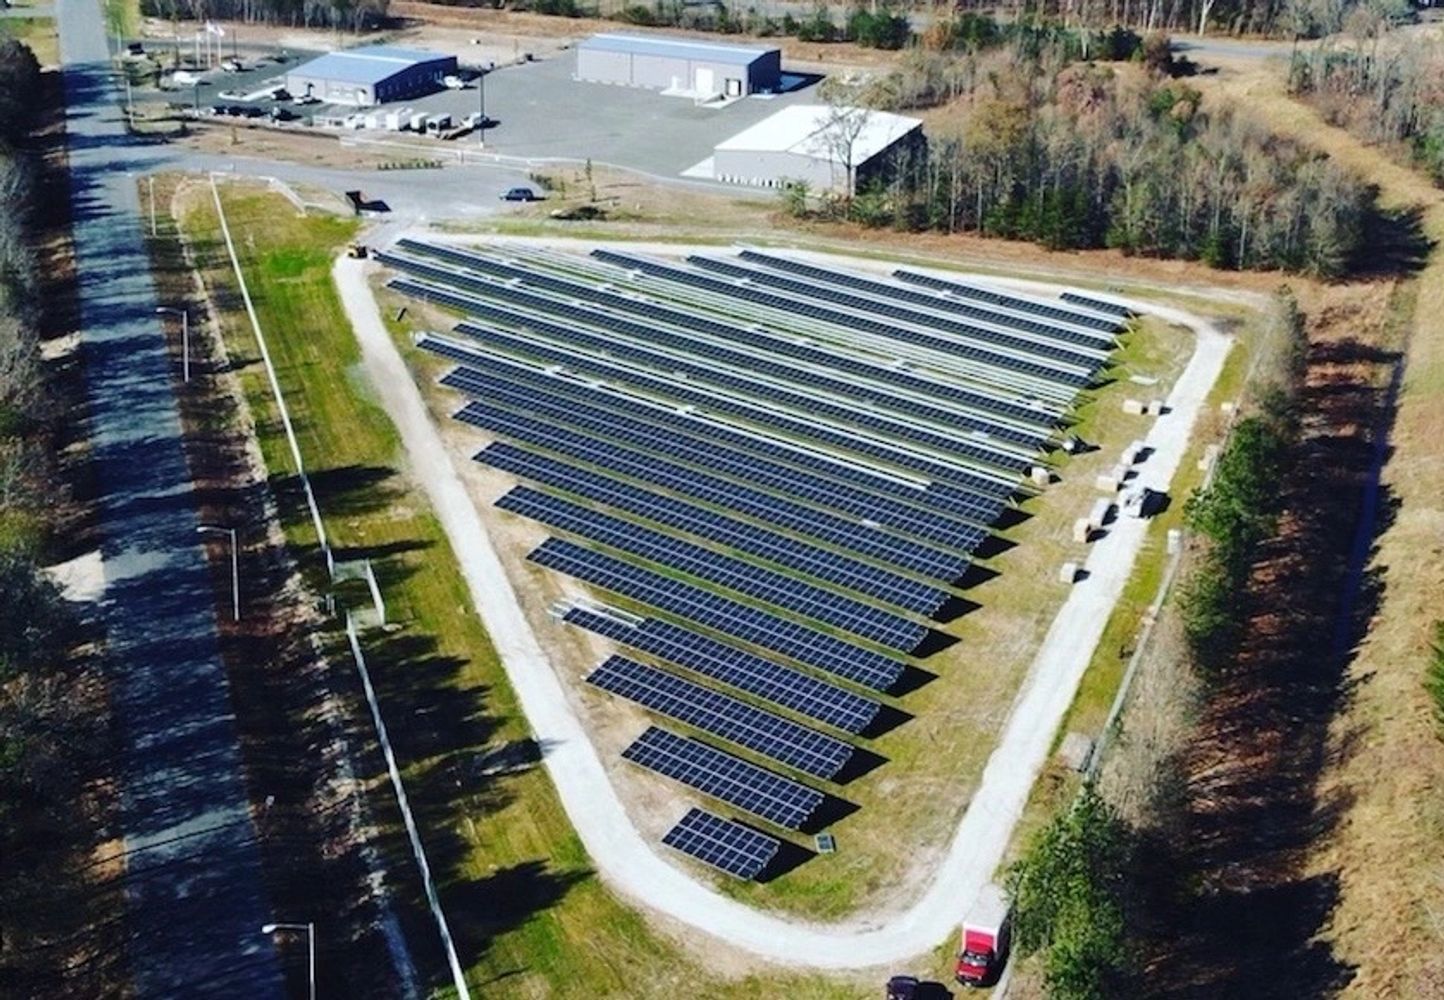 The site at Federalsburg, MD, engineered by Solar Lane LLC.